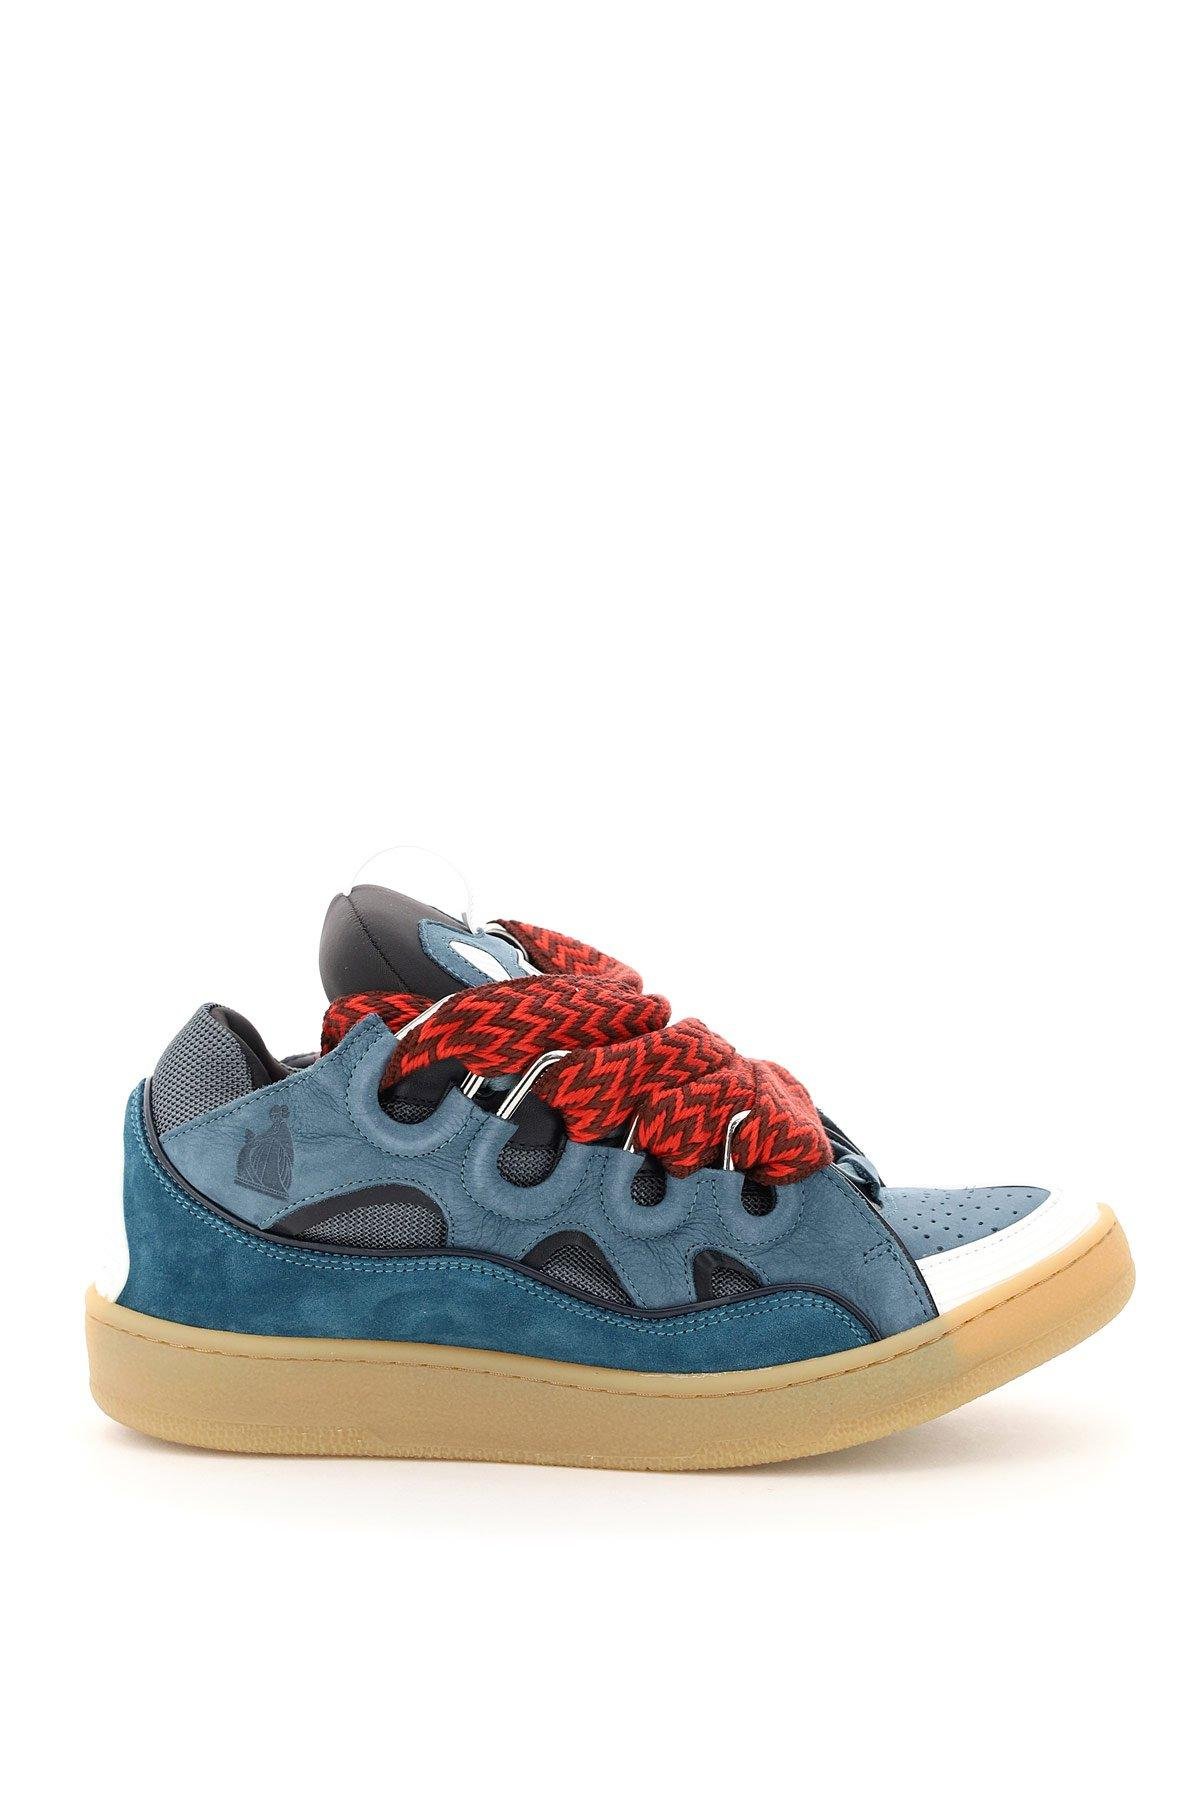 Lanvin Synthetic Curb Lace-up Sneakers in Blue for Men - Lyst